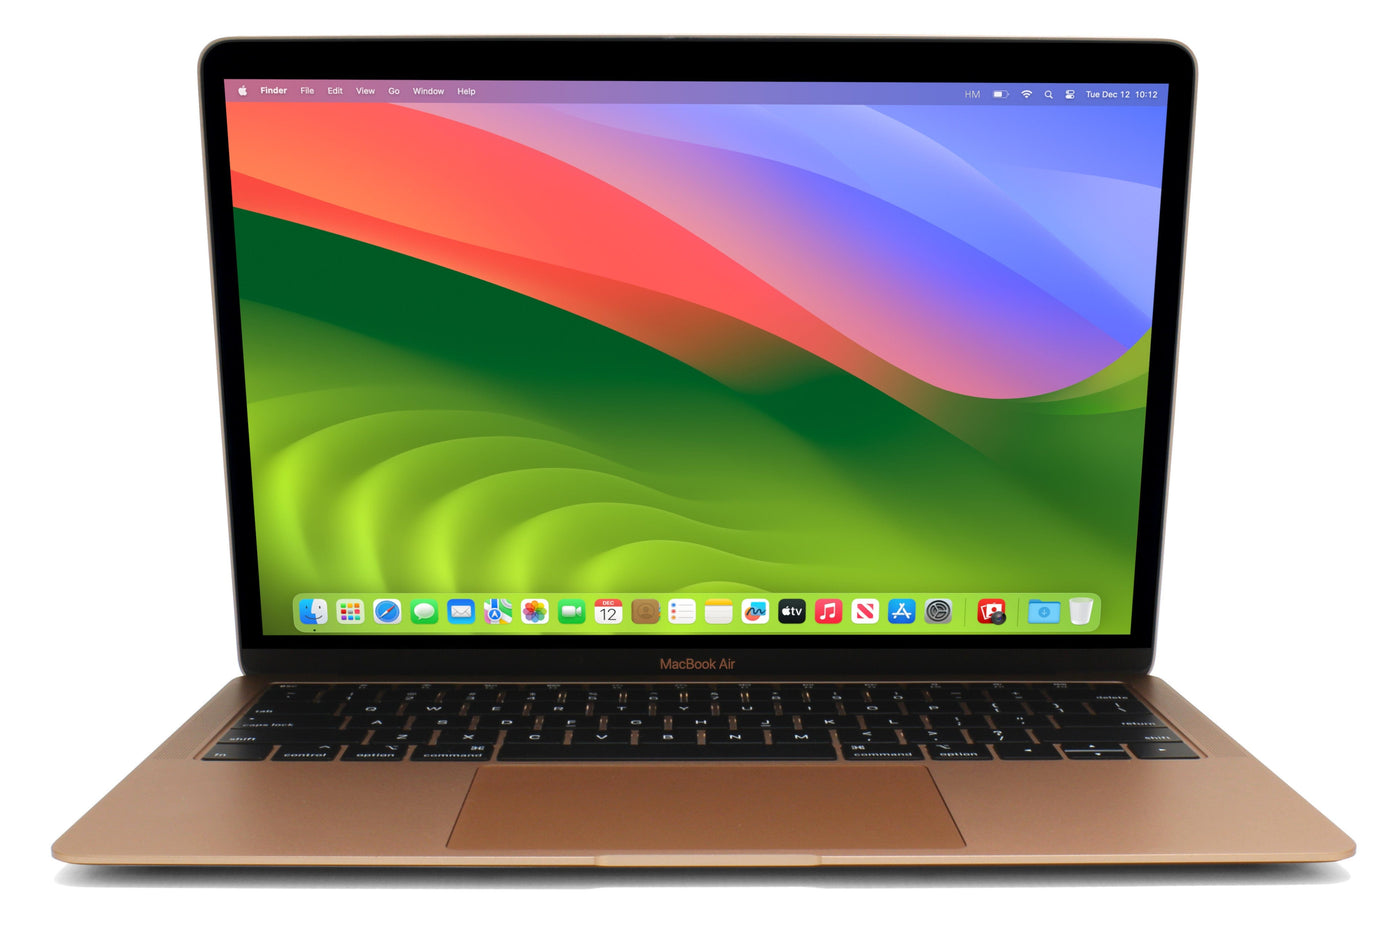 Apple MacBook Air 13-inch MacBook Air 13-inch Core i5 1.6GHz (Gold, 2019) - Excellent